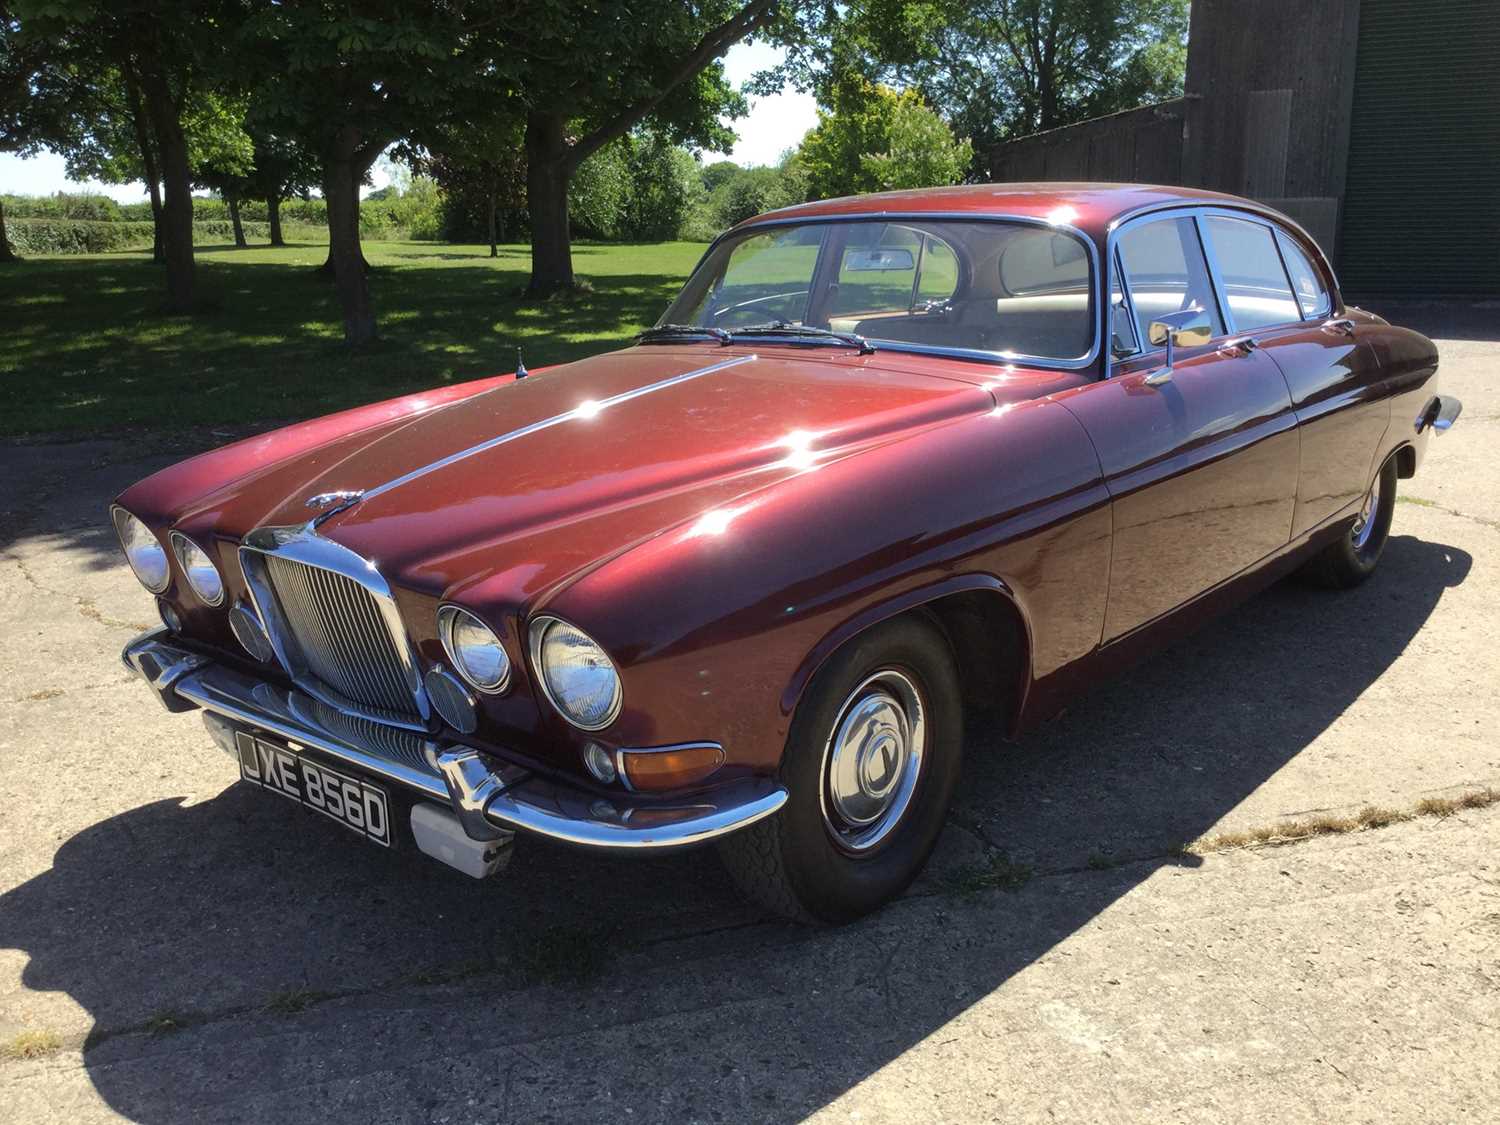 1966 Jaguar MK10 saloon, Reg. No. JXE856D, rare manual transmission with overdrive and believed onl - Image 9 of 27